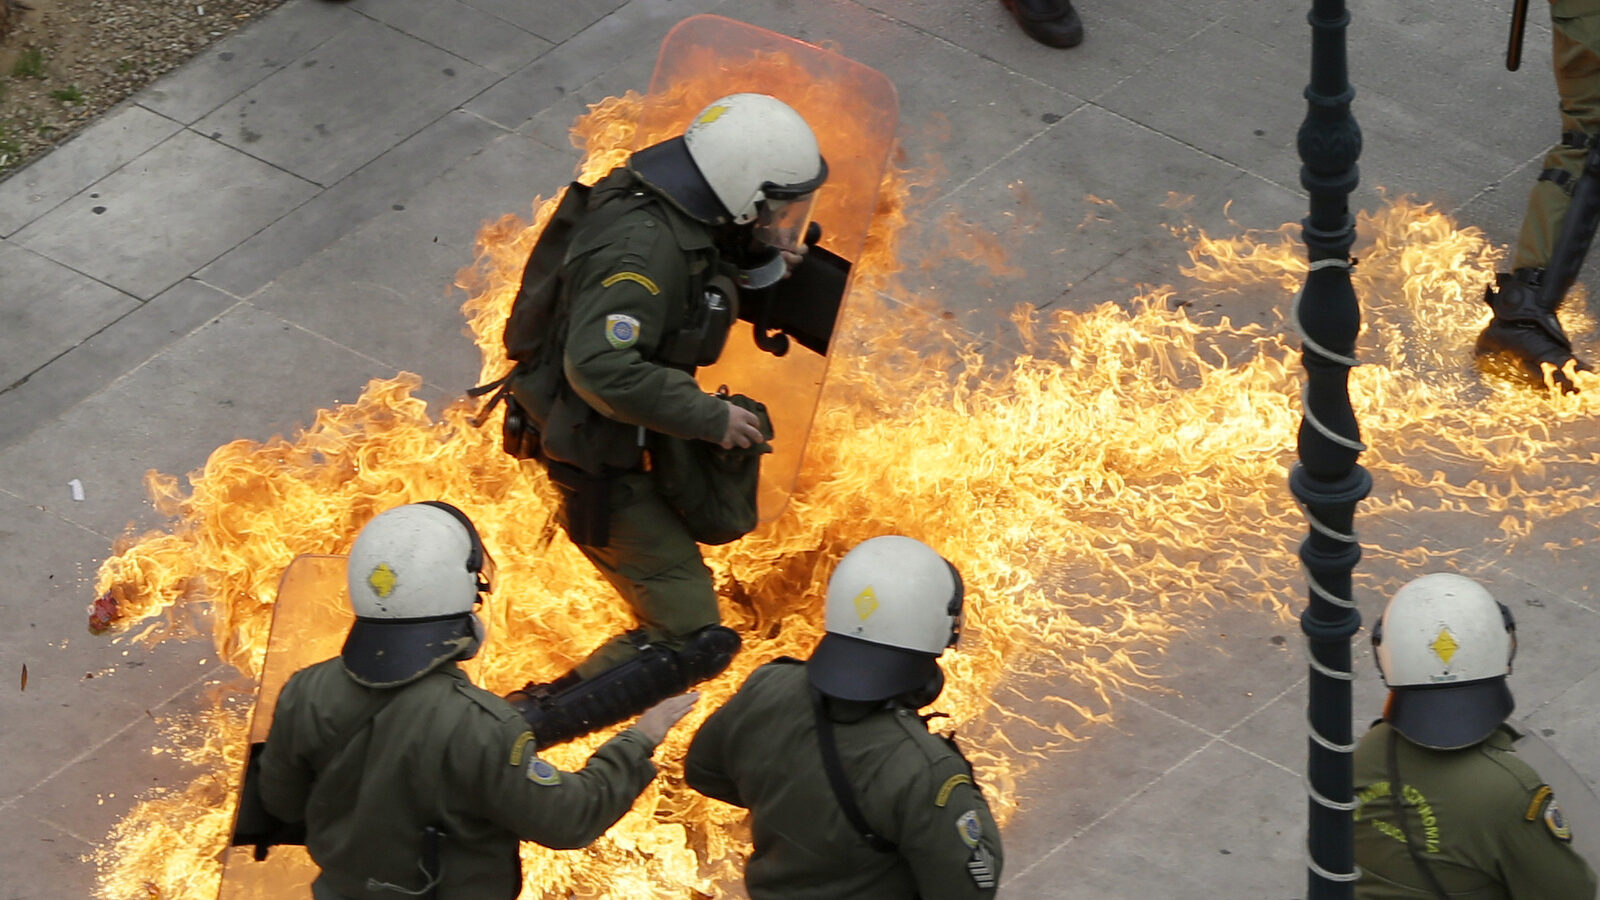 Riot policemen try to avoid a petrol bomb thrown by protesters during a 24-hour nationwide general strike in Athens, Thursday, Feb. 4, 2016. Clashes have broken out between Greek police and youths throwing fire bombs and stones, as tens of thousands of people march through central Athens to protest planned pension reforms.(AP Photo/Thanassis Stavrakis)